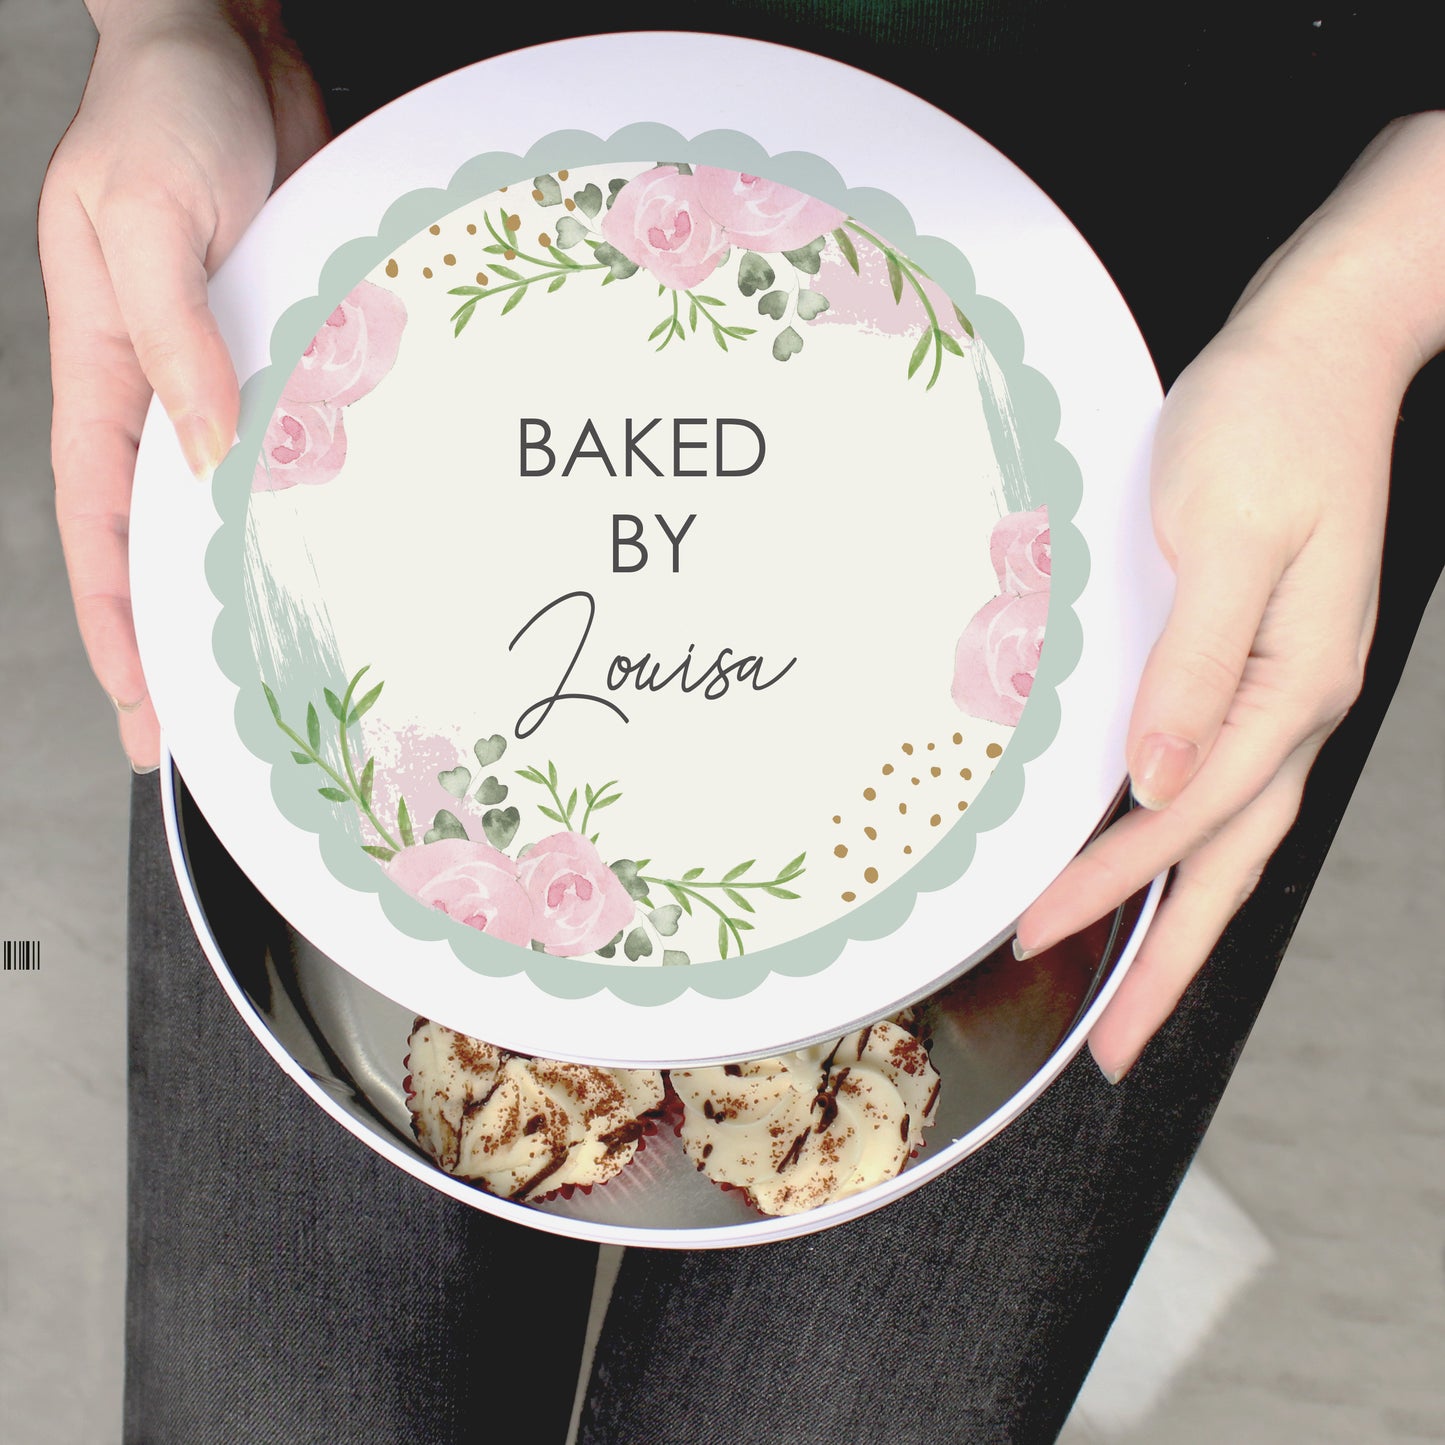 A woman is holding a Personalised Floral Cake Tin that says "BAKED BY Louisa"